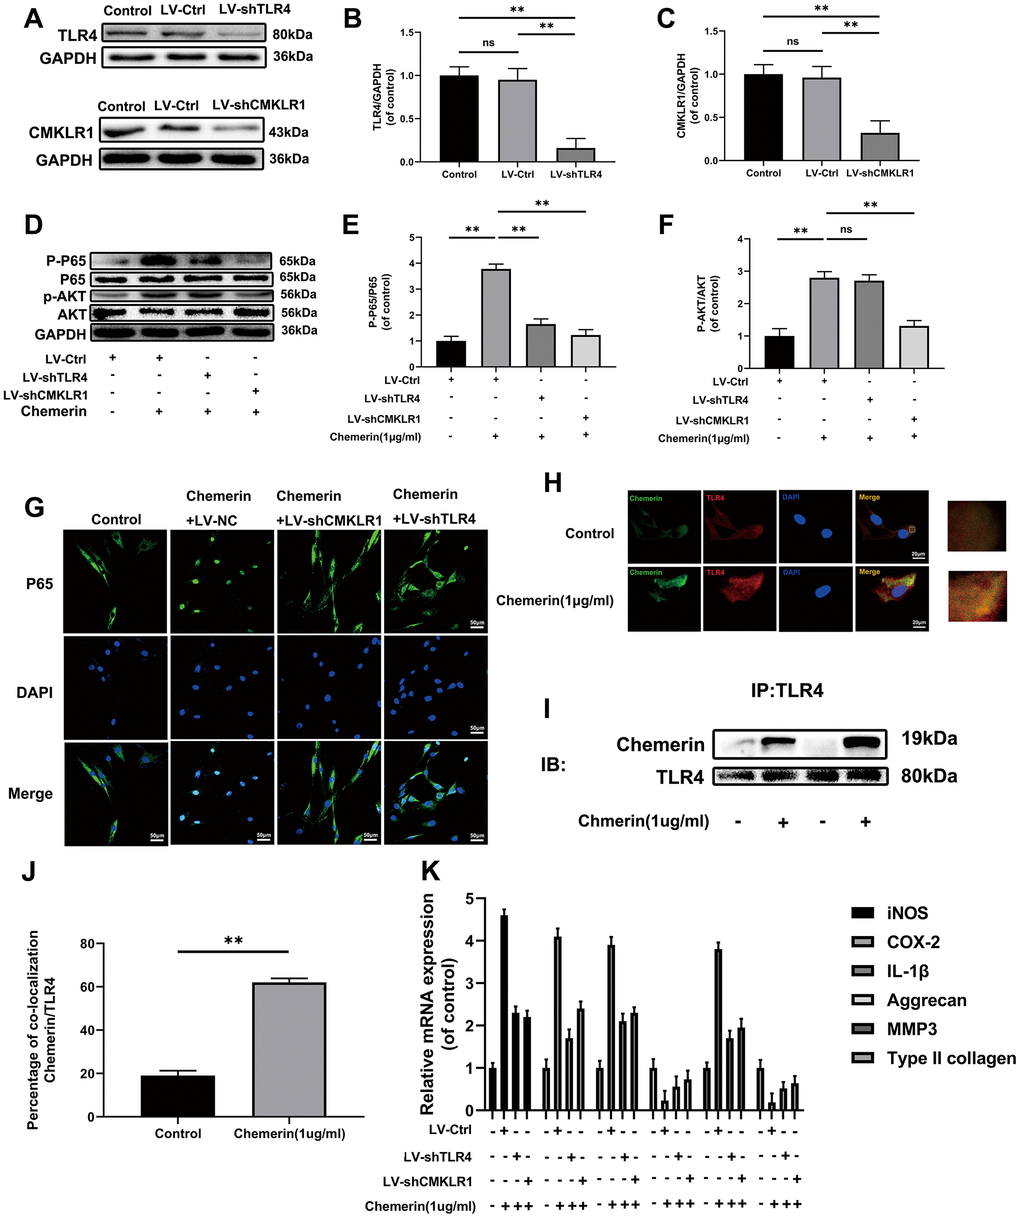 TLR4, and CMKLR1 were involved in chemerin-induced signaling pathway activation, ECM disorder and inflammatory response. (A) The expression levels of TLR4, and CMKLR1 were visualized by western blotting. (B, C) Quantification of TLR4, and CMKLR1 immunoblots. (D) The expression levels of p-AKT, AKT, p-p65, and p65 were evaluated by western blotting. (E, F) Quantification of p-AKT, AKT, p-p65, and p65 immunoblots. (G) The expression levels of p65, and nuclear translocation were observed by immunofluorescence. (H) Representative image of immunofluorescence double staining of TLR4, and chemerin in NPCs. (J) The quantification of the percentage of co-location of chemerin/TLR4 was detected by image J. (I) The co-immunoprecipitation data showed that compared with untreated group, the binding of chemerin to TLR4 was significantly increased after treatment with chemerin. (K) The mRNA expression levels of iNOS, COX-2, IL-1β, aggrecan, MMP3, and collagen II in NPCs were evaluated by RT- PCR. Data are represented as mean ± SEM of three independent experiments, each done in triplicate. Significant differences between groups are indicated as **p 